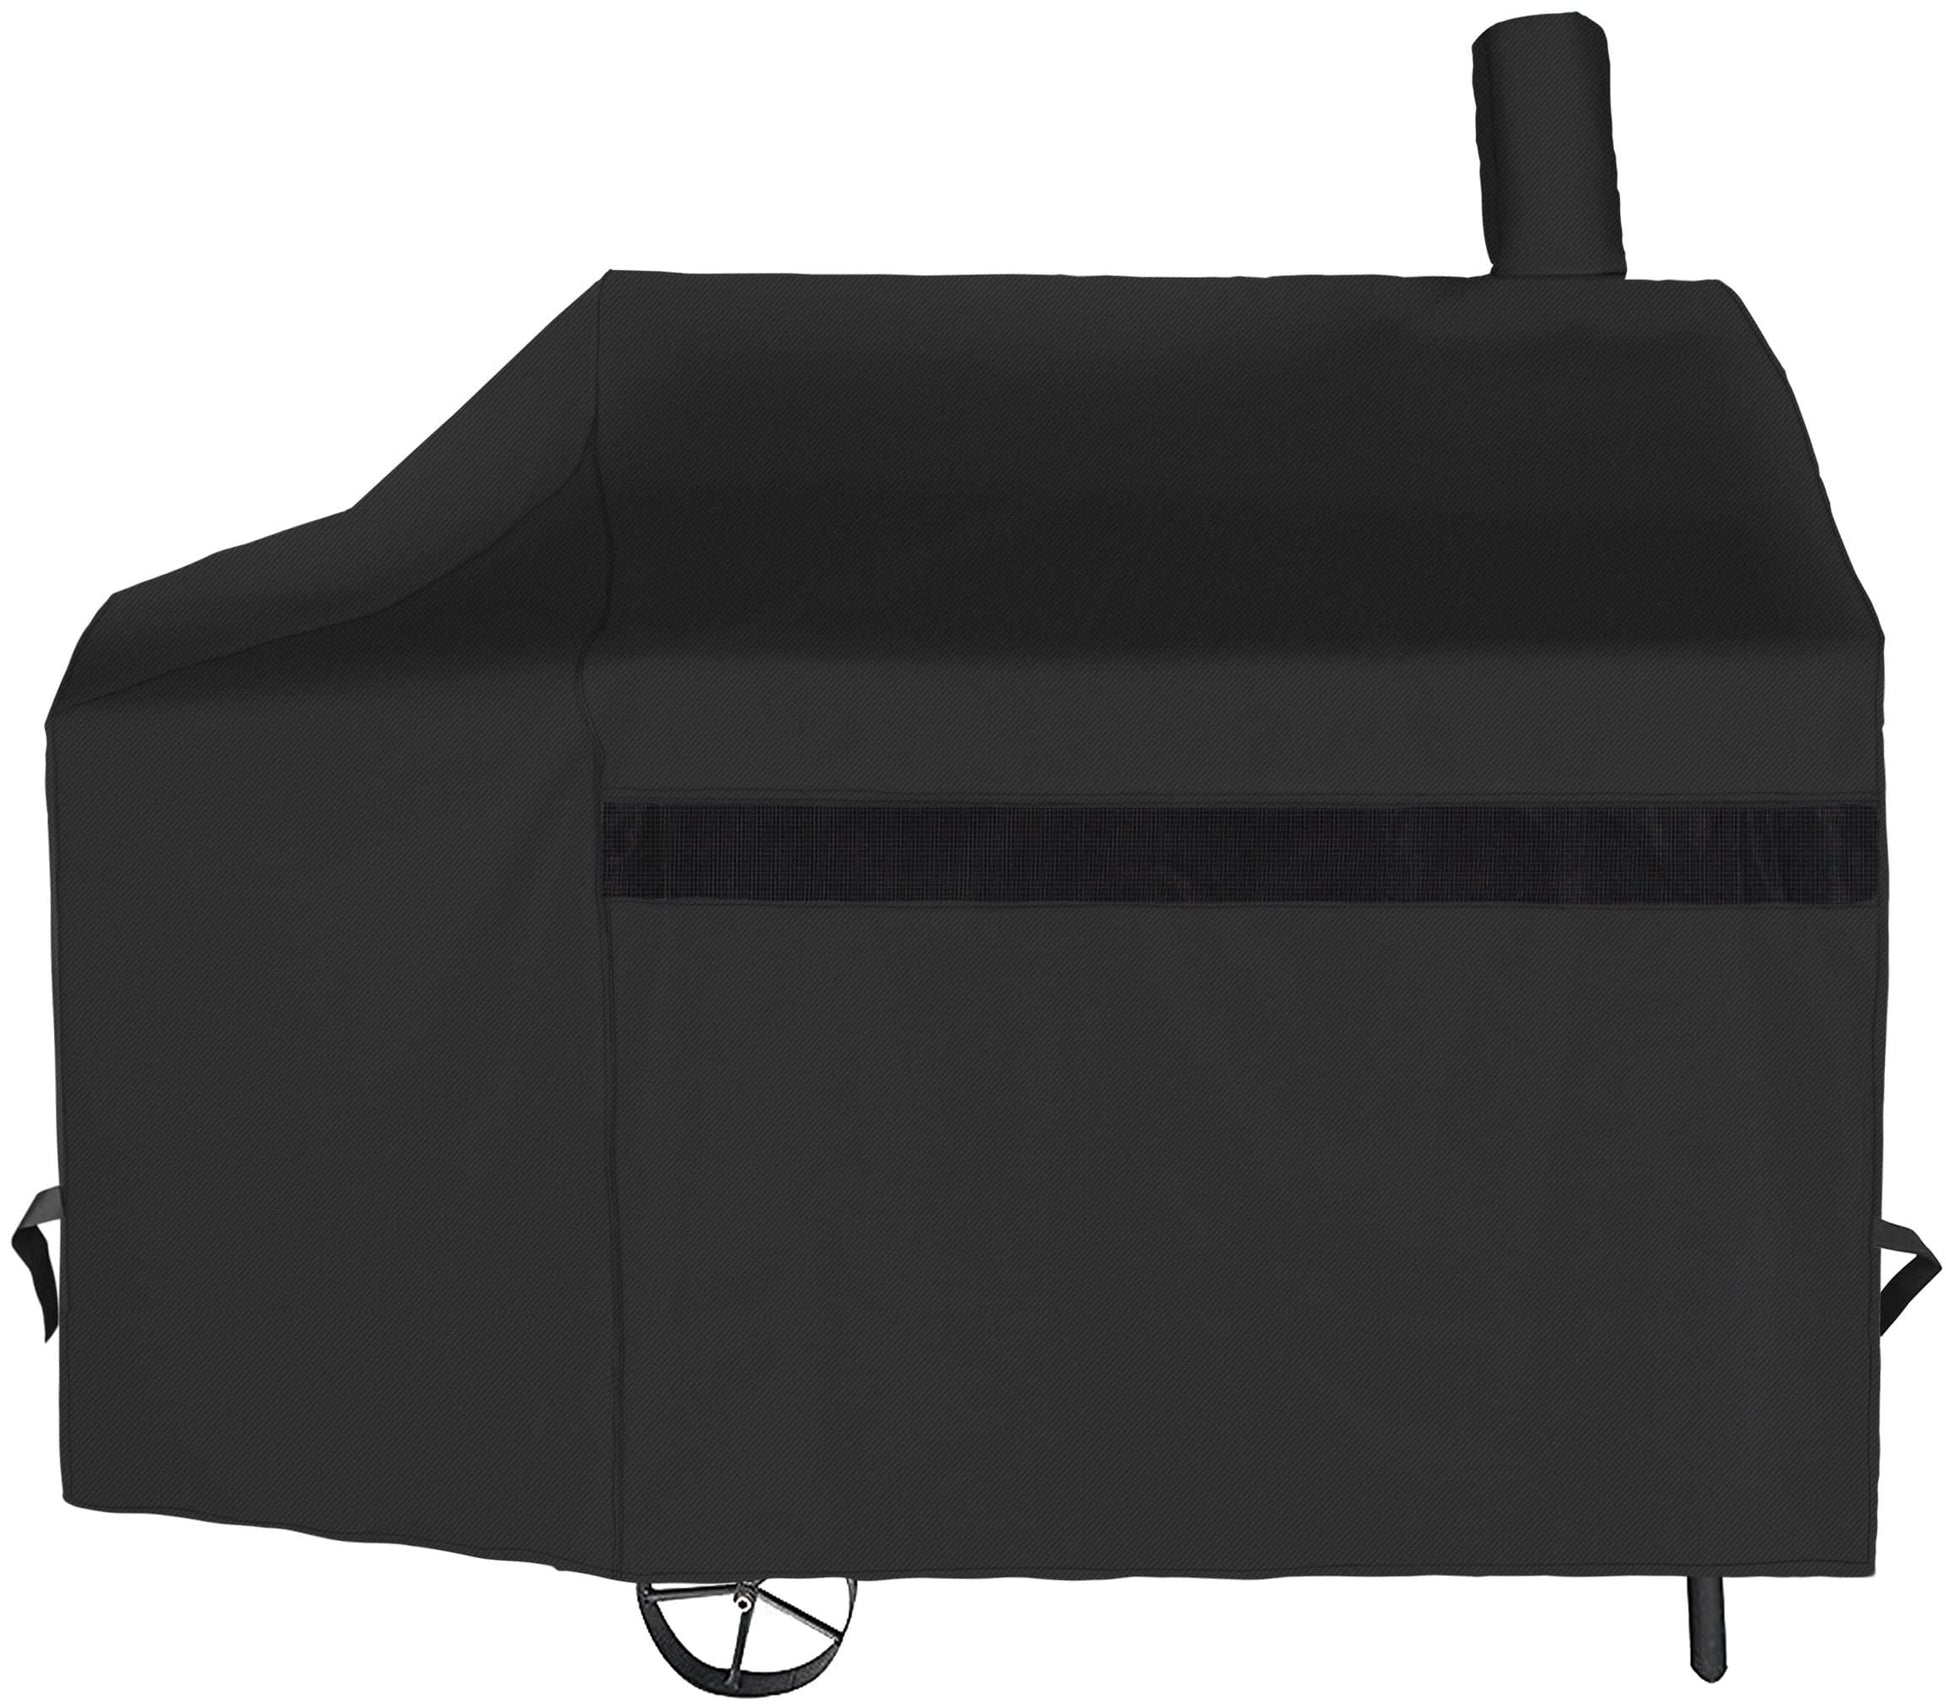 NEXCOVER Offset Smoker Cover - 60 Inch Waterproof Charcoal Grill Cover, Outdoor Heavy Duty BBQ Cover, Rip Resistant Smokestack Barbecue Cover for Brinkmann Char-Broil Weber Nexgrill, Black. - CookCave